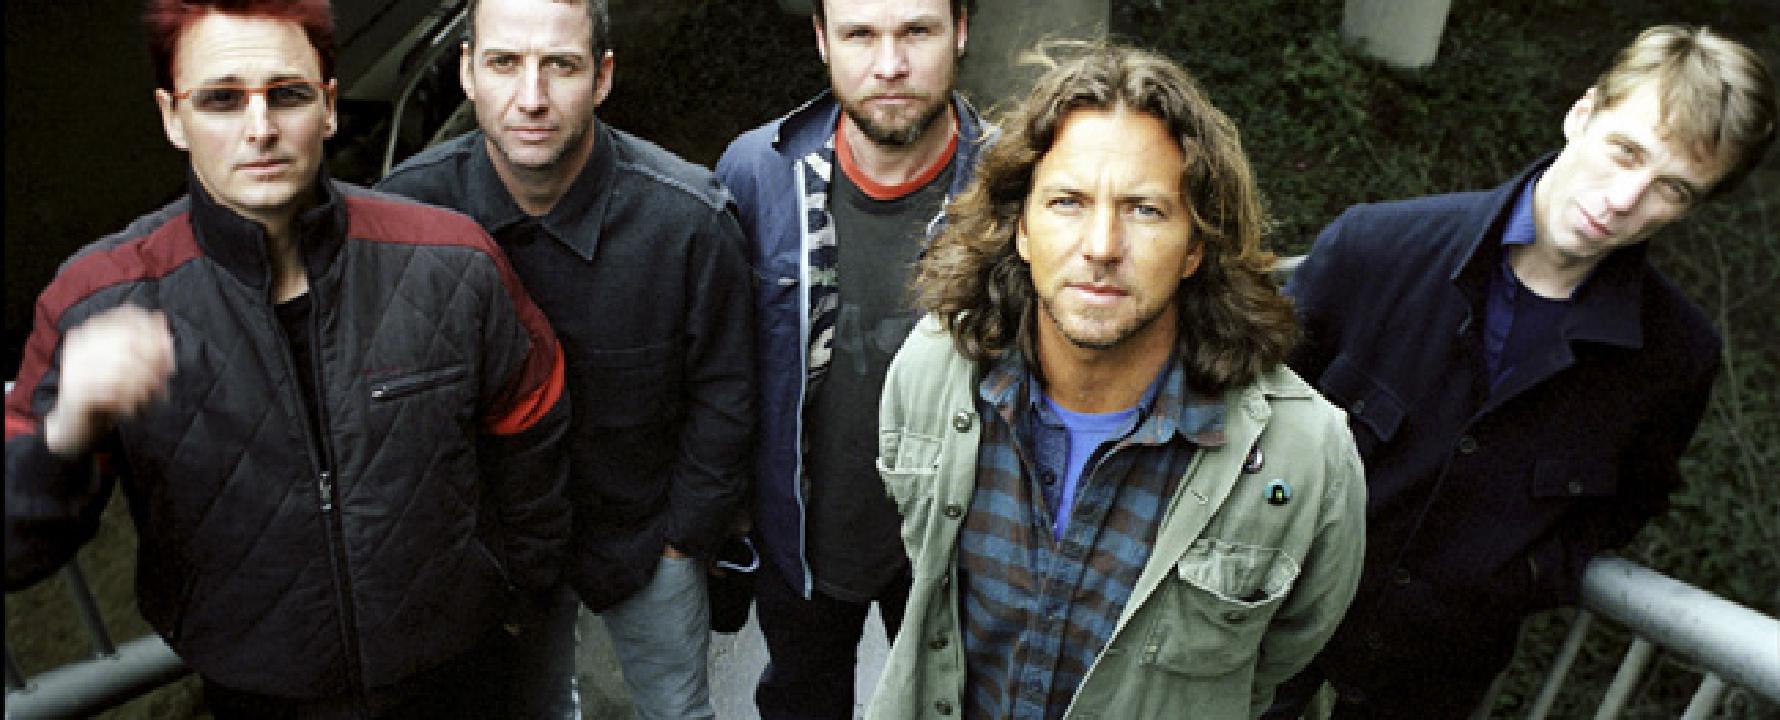 Promotional photograph of Pearl Jam.